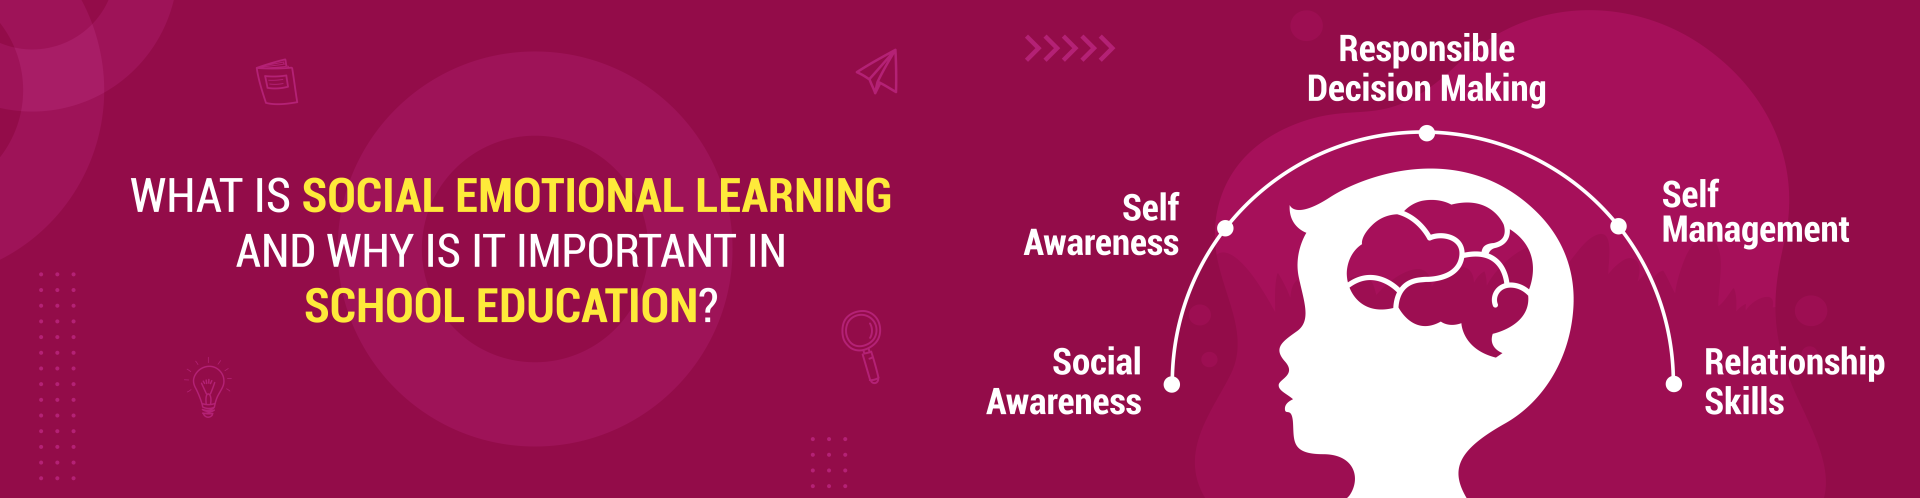 What is Social-Emotional Learning, and why is it so important?